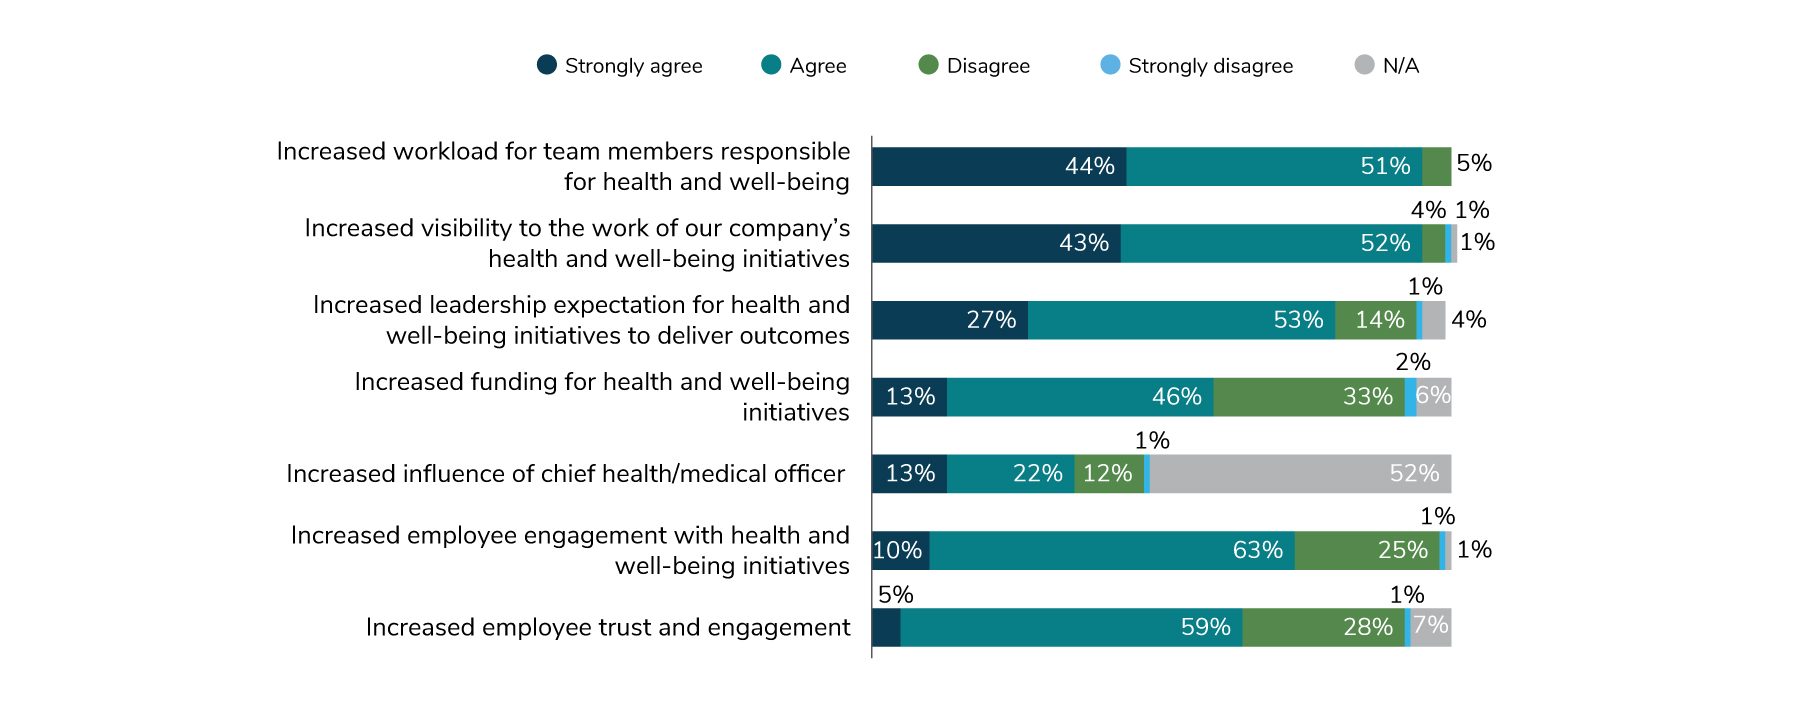 Employers agree that there is an increased workload for health and well-being teams (95%), increased visibility for health and well-being work (95%), increased leadership expectations for health and well-being to deliver results (80%) and increased funding for health and well-being (59%).